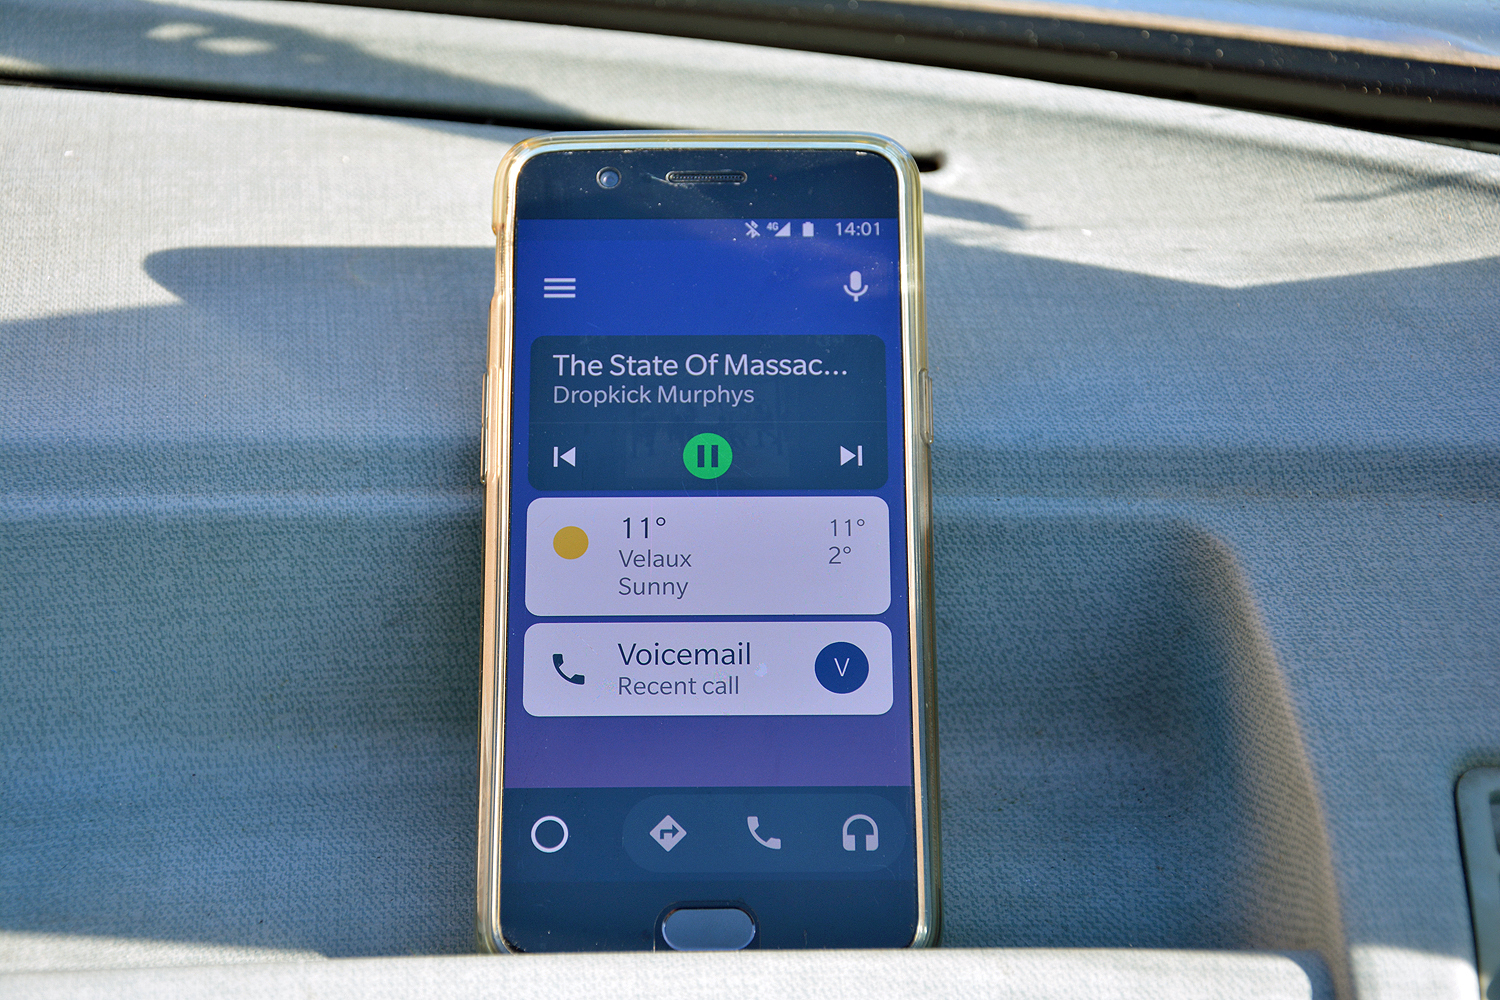 android auto november 2018 update focuses on messaging media rg 11 18 1